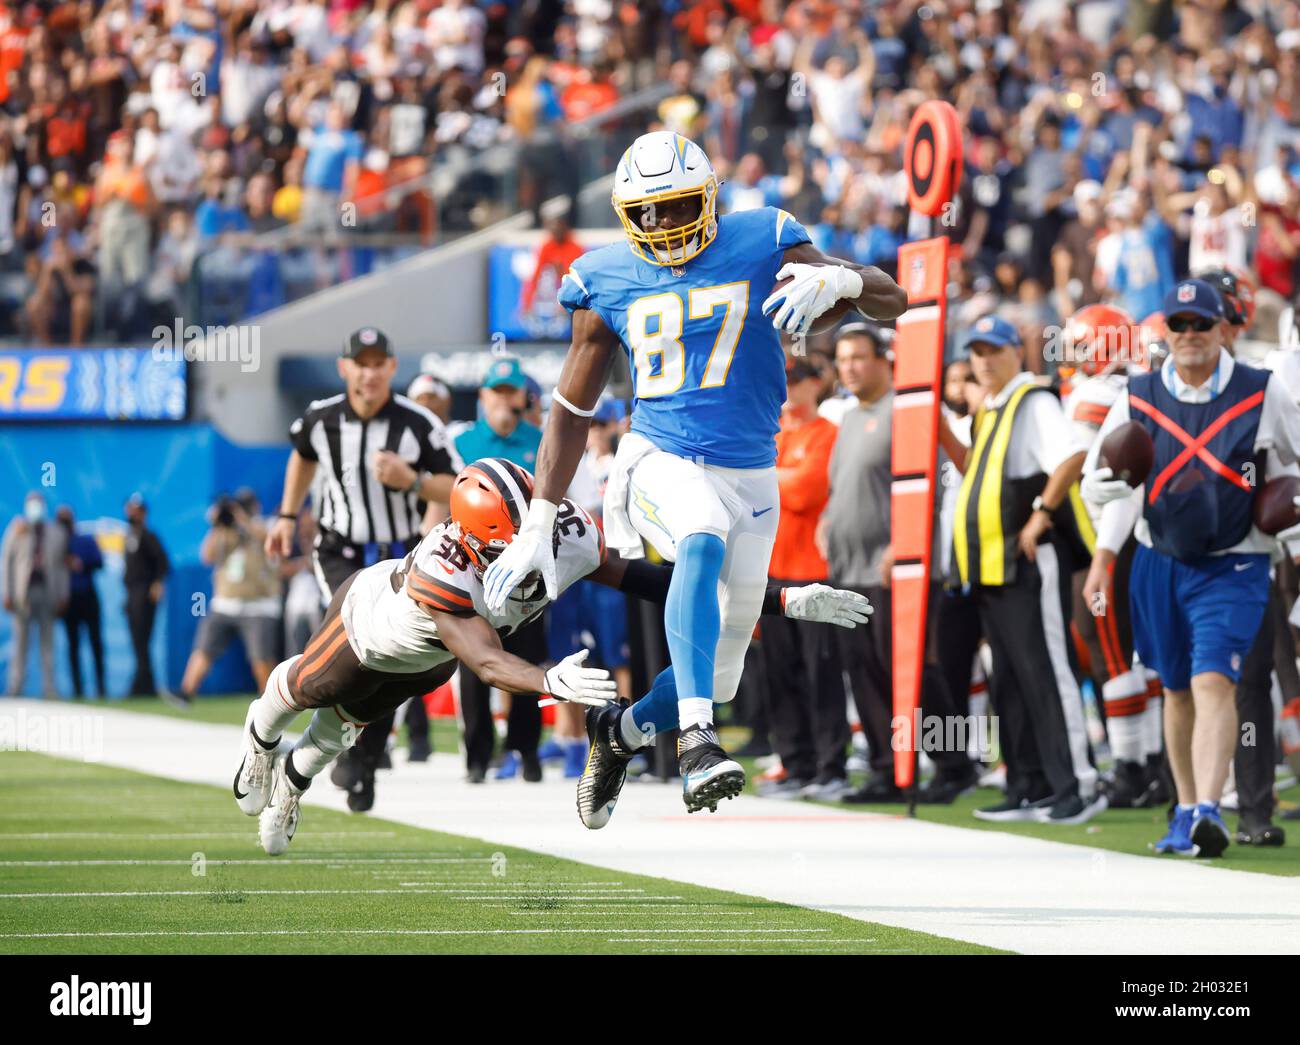 Inglewood, California, USA. 10th Oct, 2021. Los Angeles Chargers tight end Jared Cook (87) carries the ball as Cleveland Browns corner back AJ Green (38) attempts to make the tackle during the NFL game between the Los Angeles Chargers and the Cleveland Browns at SoFi Stadium in Inglewood, California. Charles Baus/CSM/Alamy Live News Stock Photo